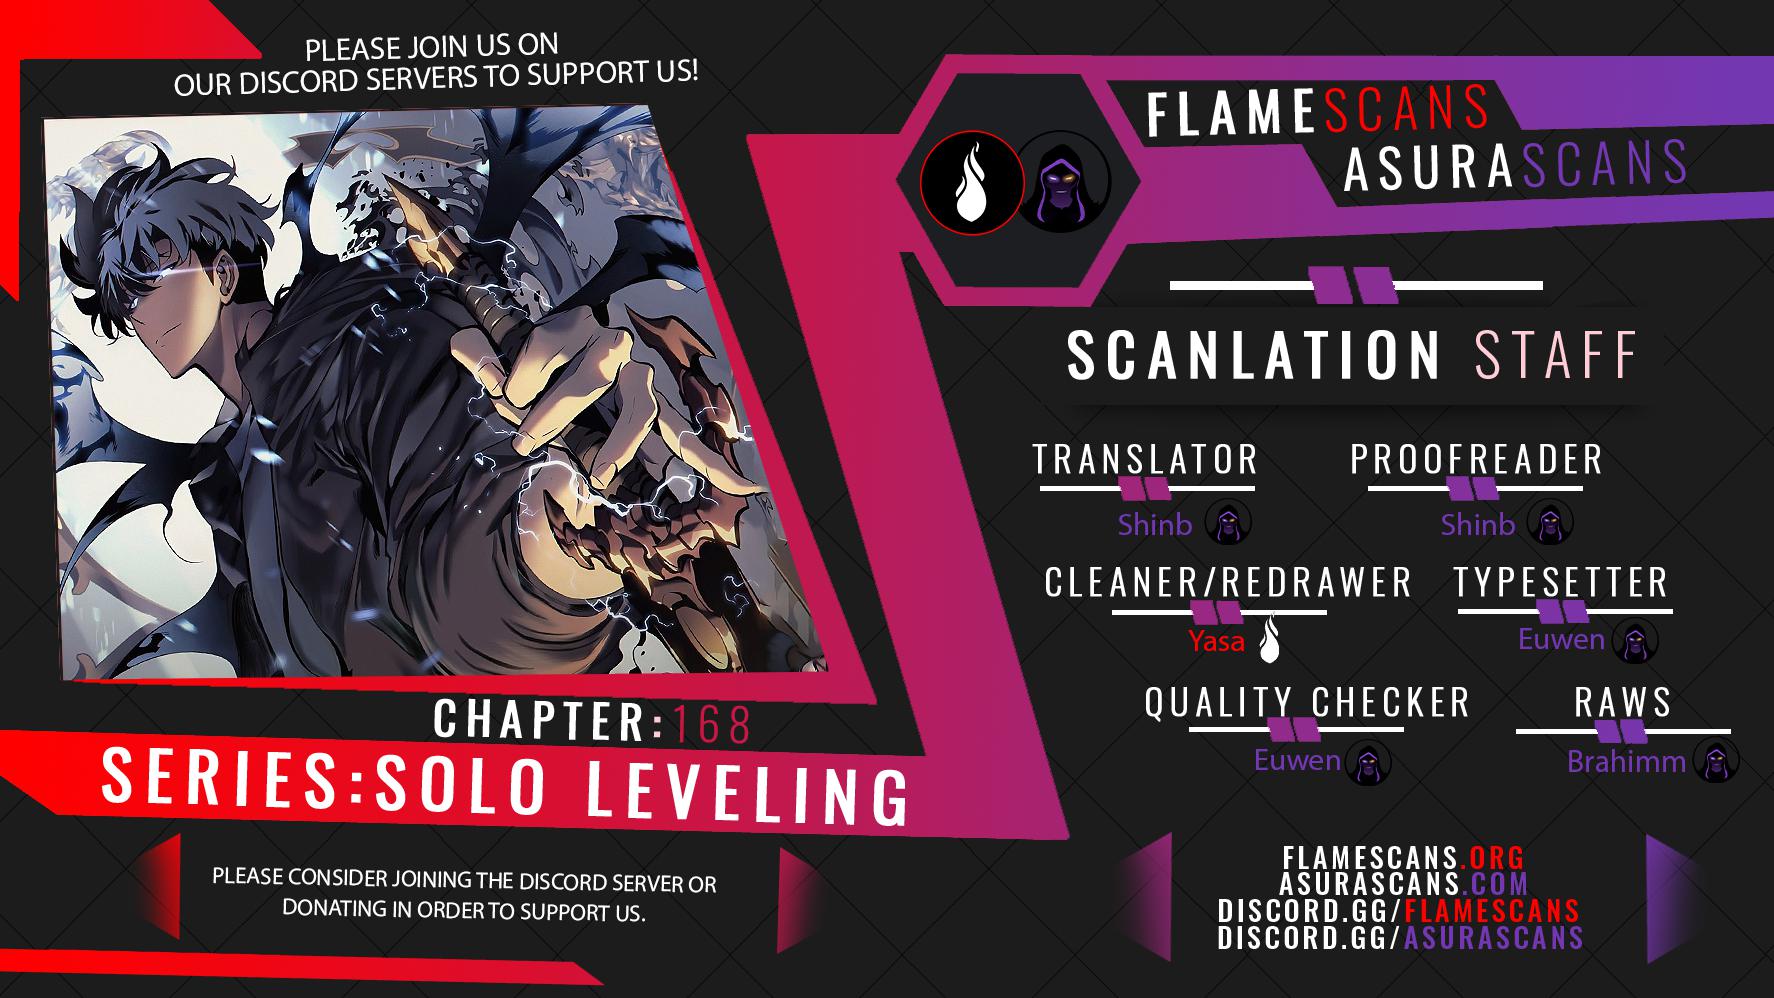 solo leveling Chapter 168, solo leveling 168, Read solo leveling Chapter 168, solo leveling Chapter 168 Manga, solo leveling Chapter 168 english, solo leveling Chapter 168 raw manga, solo leveling Chapter 168 online, solo leveling Chapter 168 high quality, solo leveling 168 chapter, solo leveling Chapter 168 manga scan